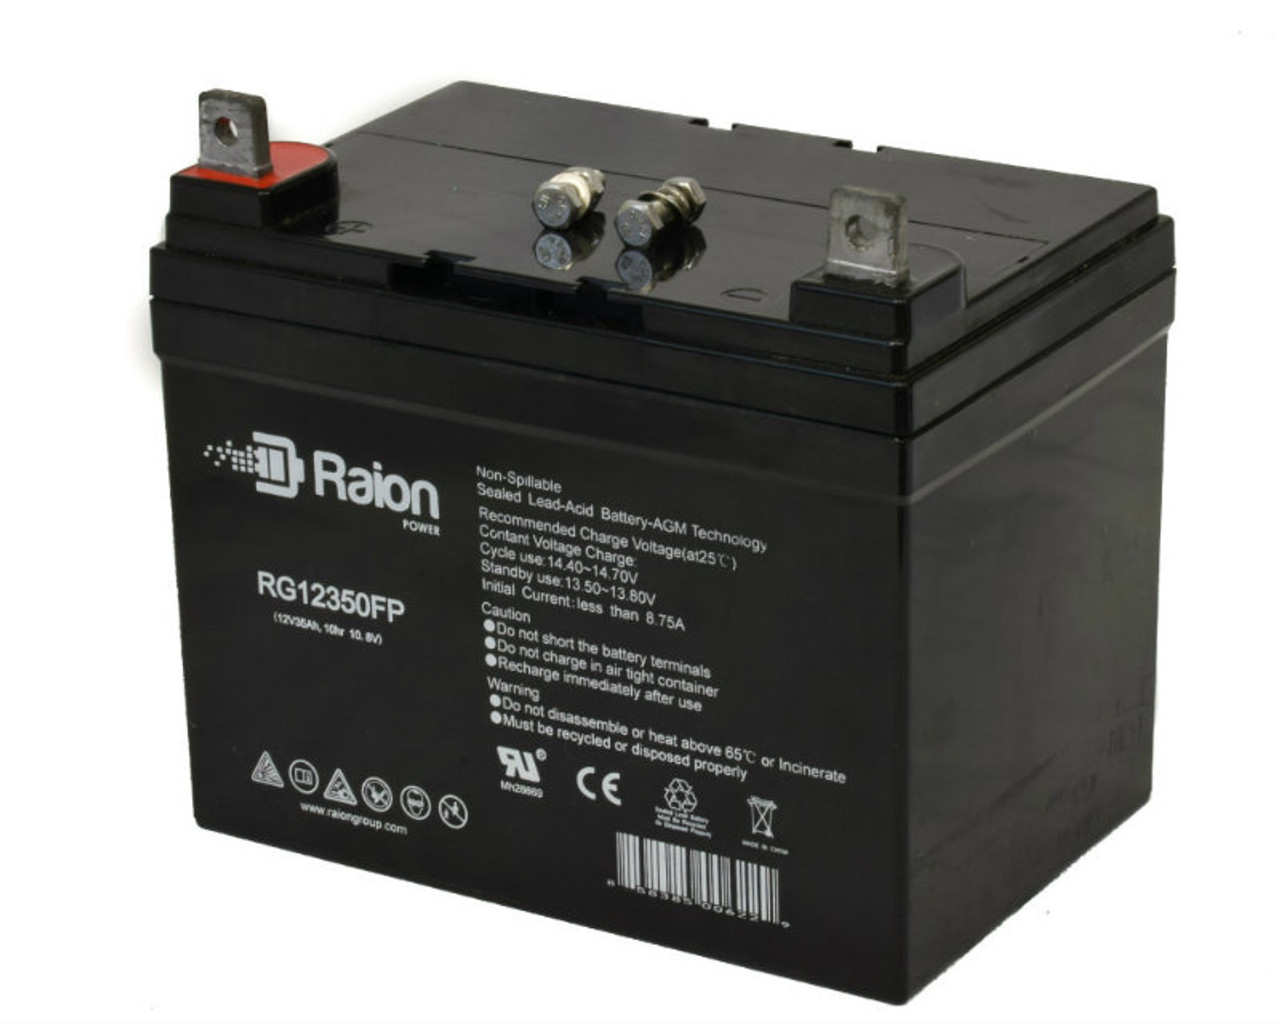 Raion Power Replacement 12V 35Ah RG12350FP Mobility Scooter Battery for Leisure Lift Viva